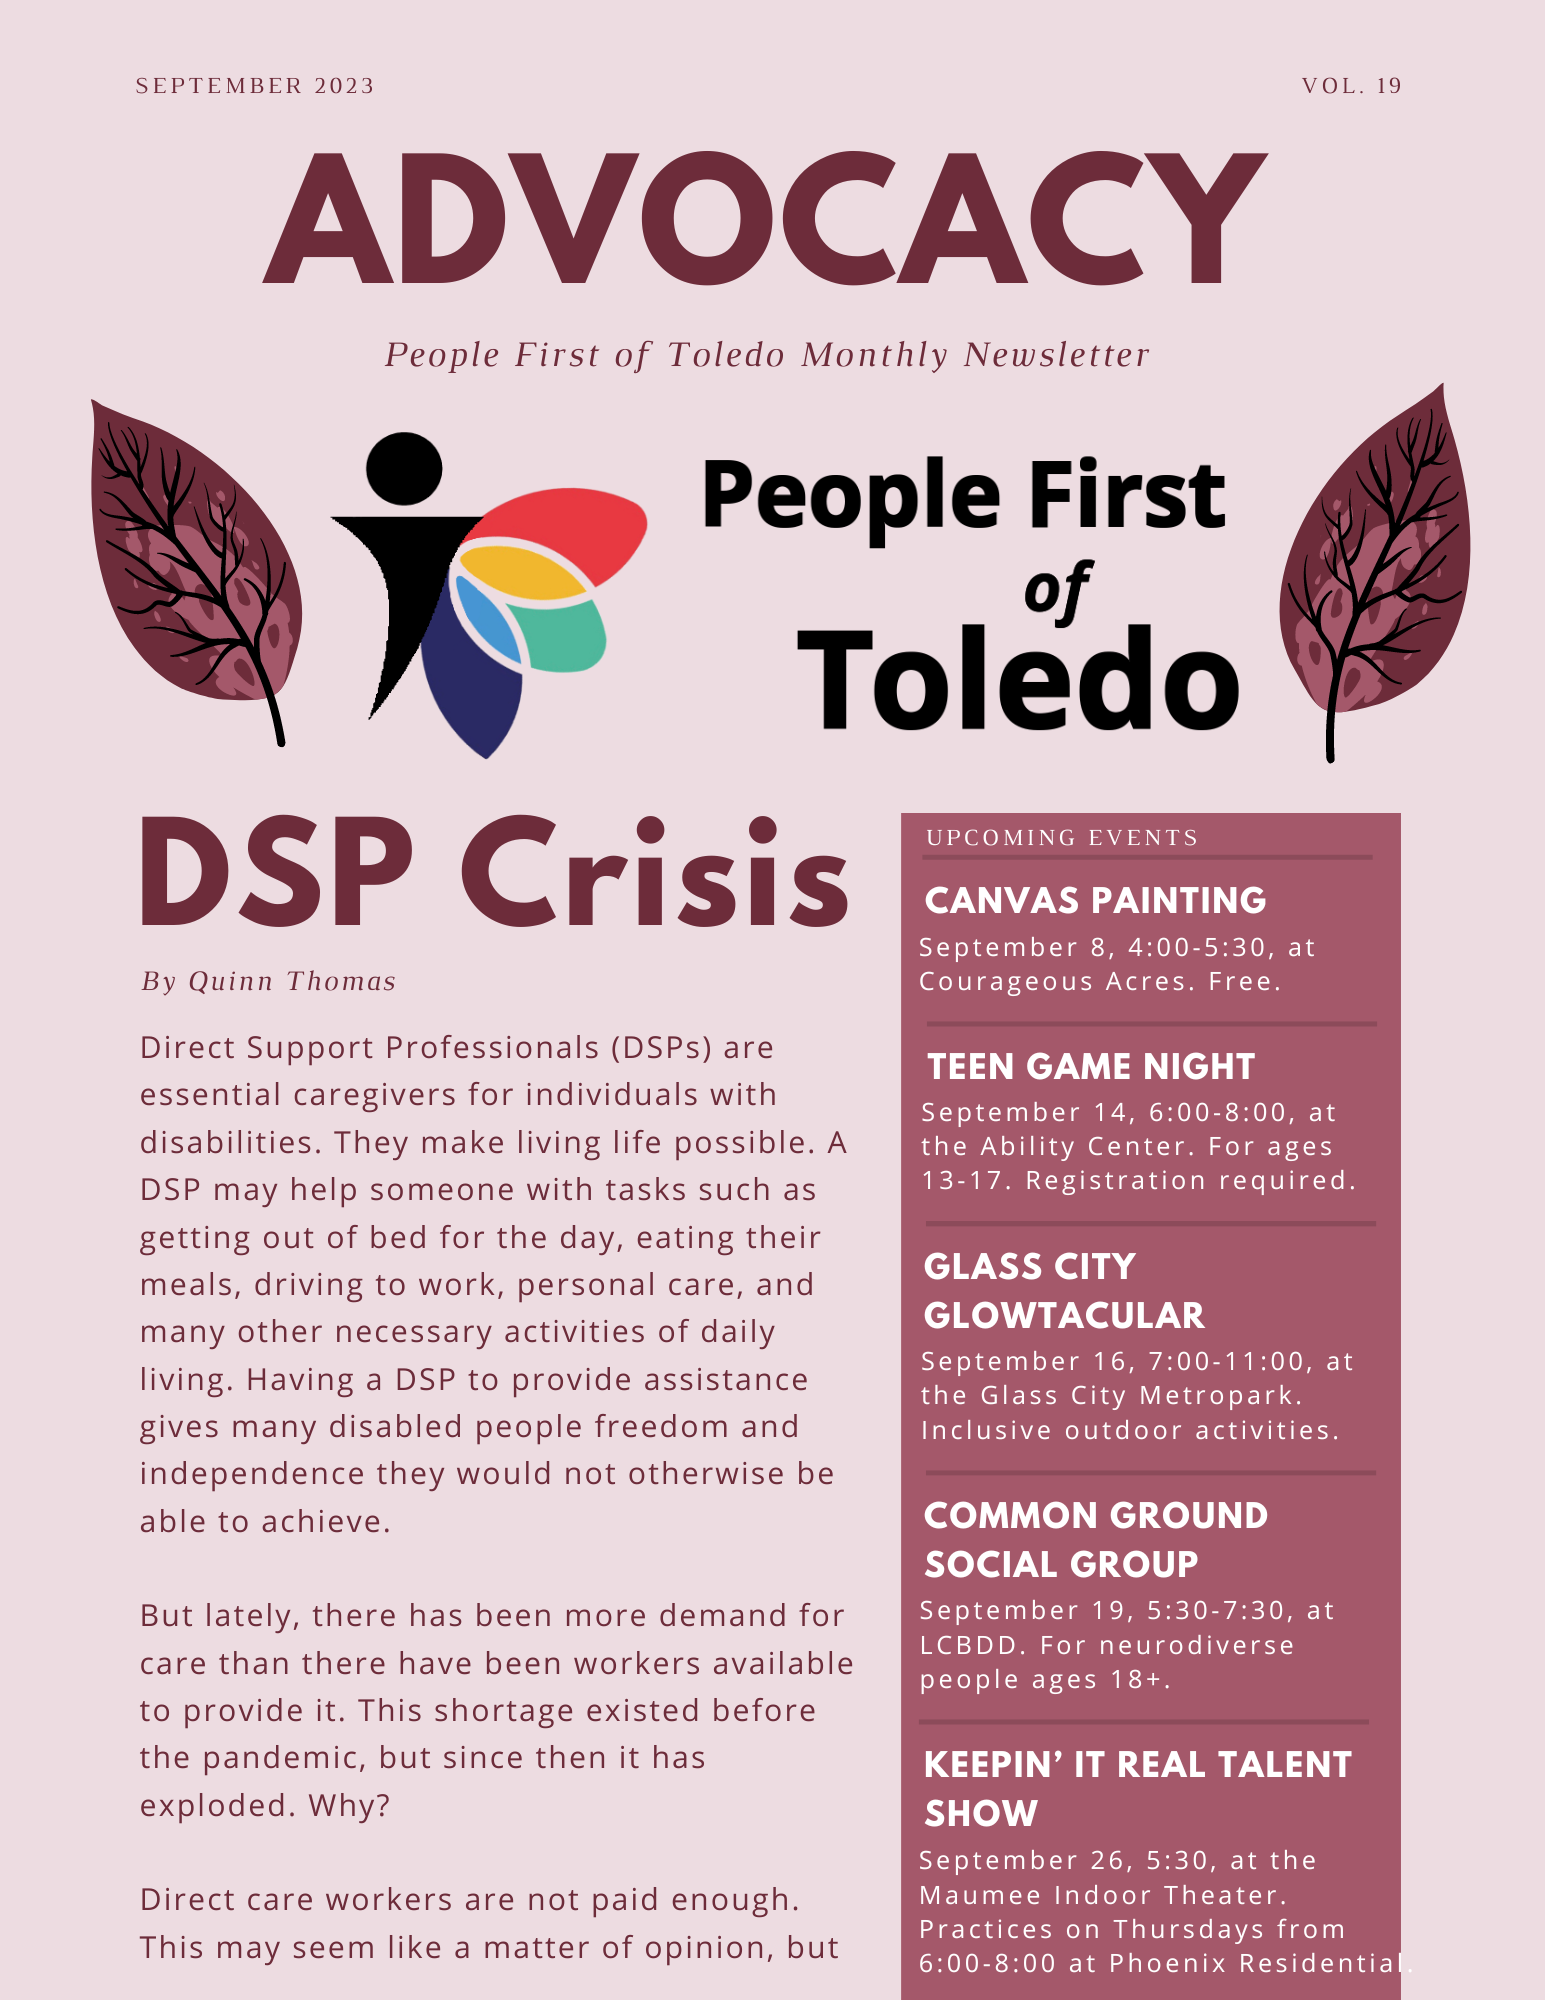 The front page of People First of Toledo's September 2023 newsletter. It is in shades of pink and dusky rose.